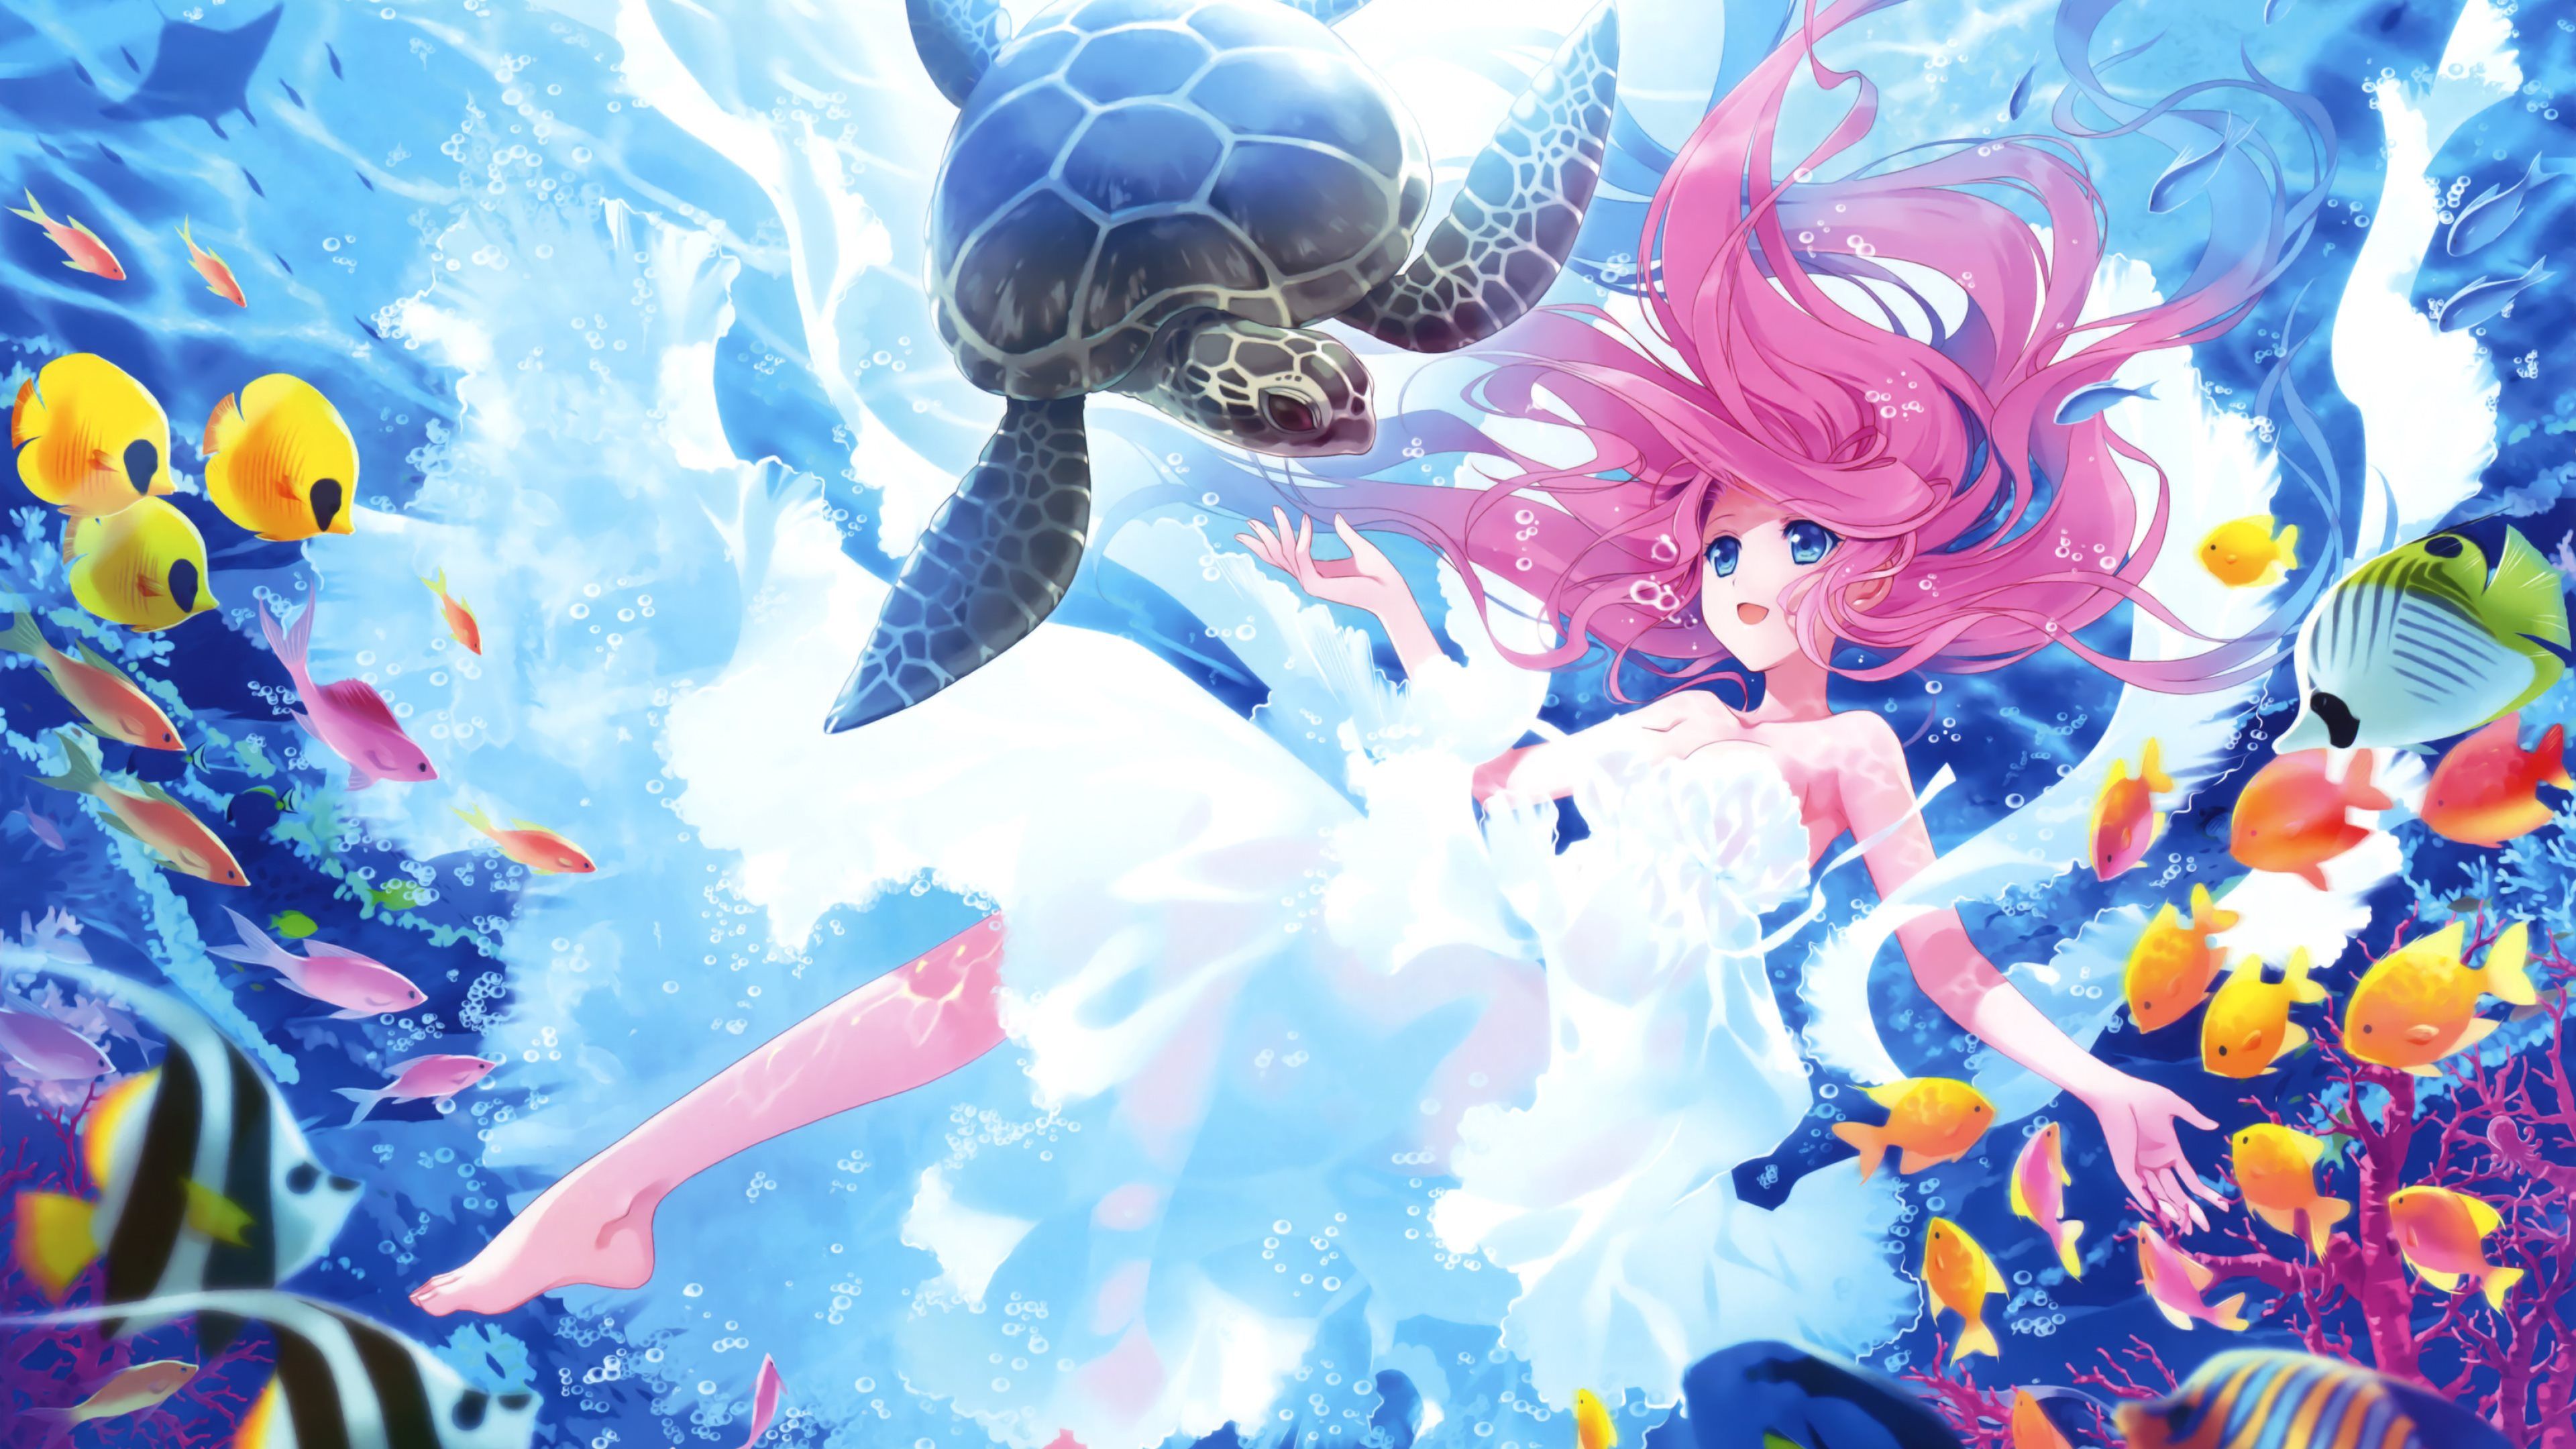 Download wallpaper Kawaii, 4k, underwater, mermaid, turtle, fish, pink hair for desktop with resolution 3840x2160. High Quality HD picture wallpaper